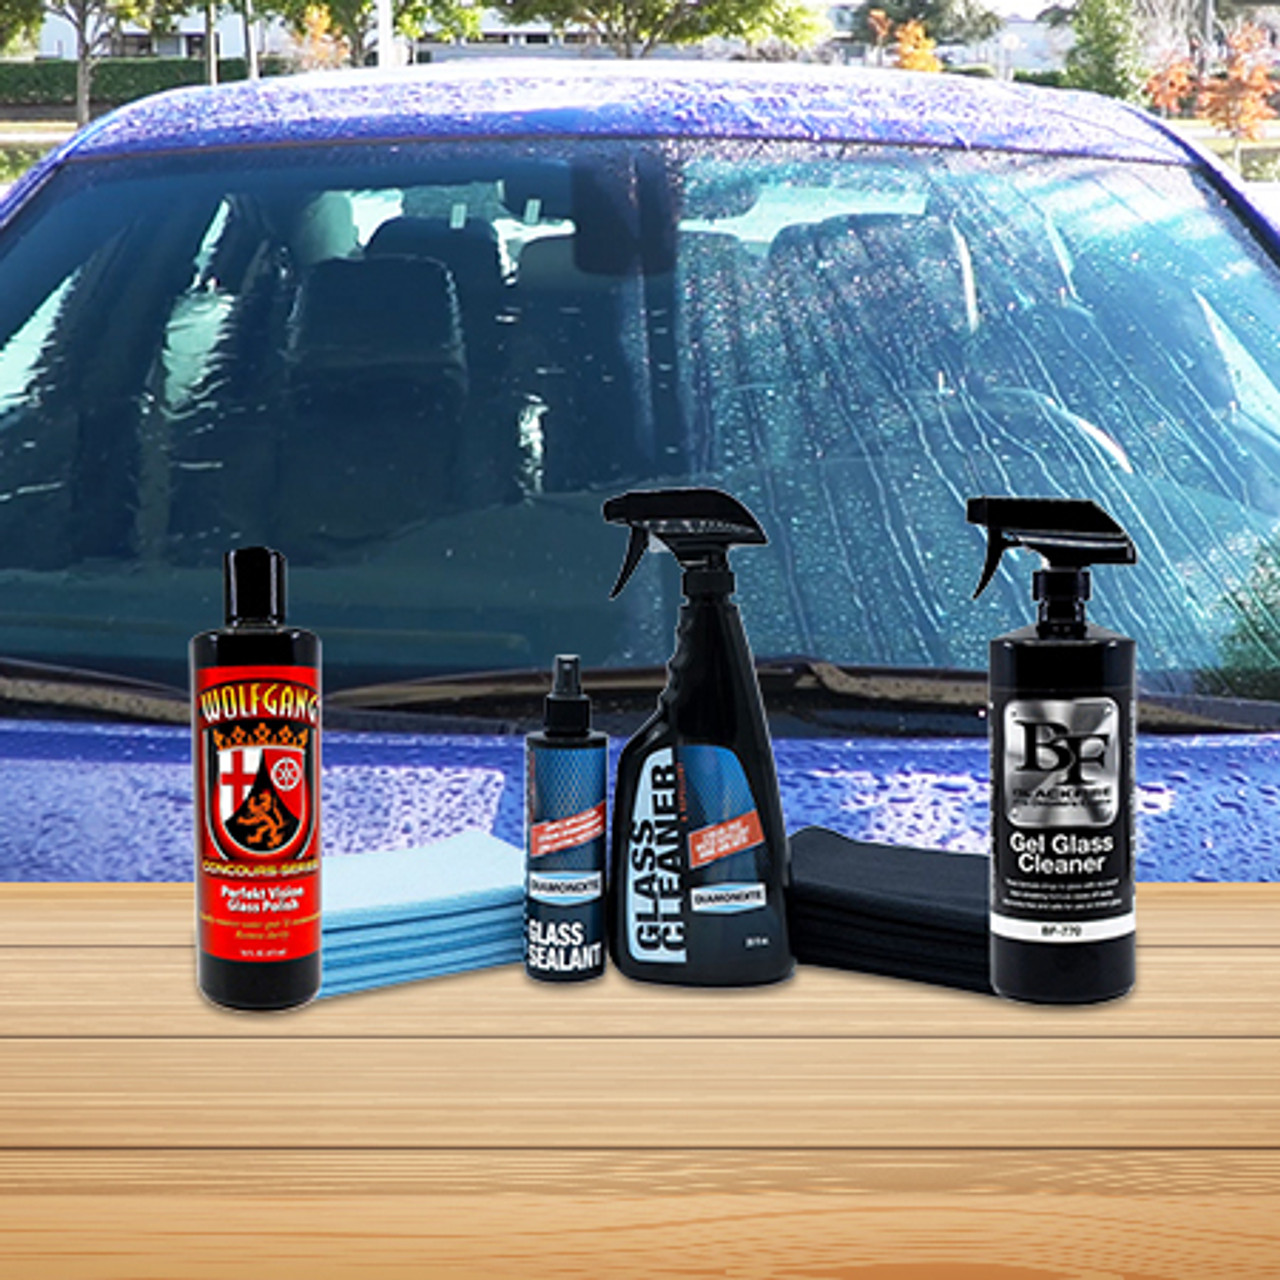 X10 Hydro Glyde Hydrophobic Windshield and Glass Sealant (30 ml) - up to 6  mos of Protection | Glass Maintenance Kit - Anti Fog Coating, Water